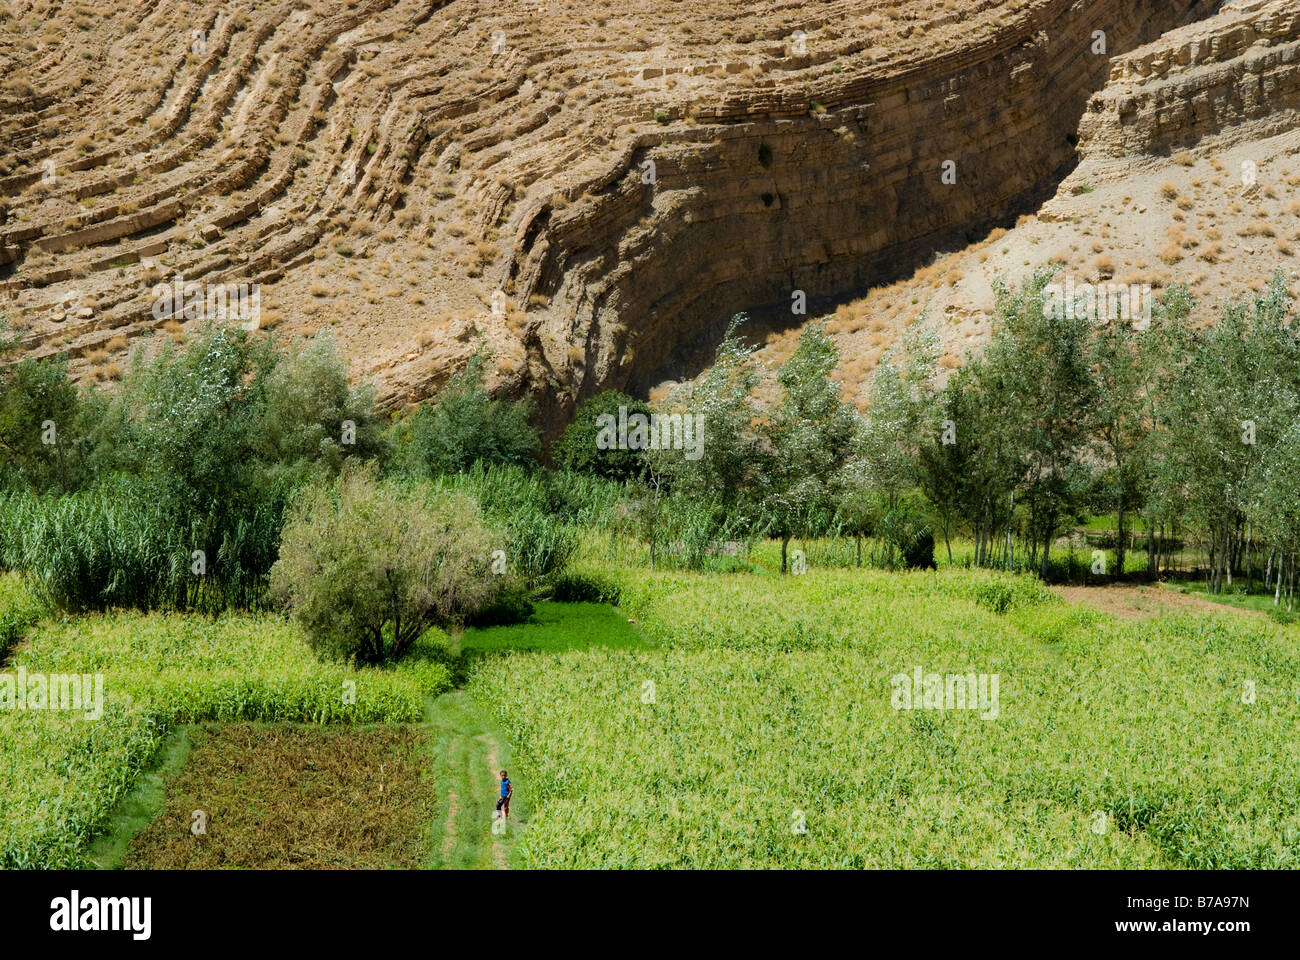 Agricultural fields in front of rock face, Gorges du Dades, Morocco, Africa Stock Photo